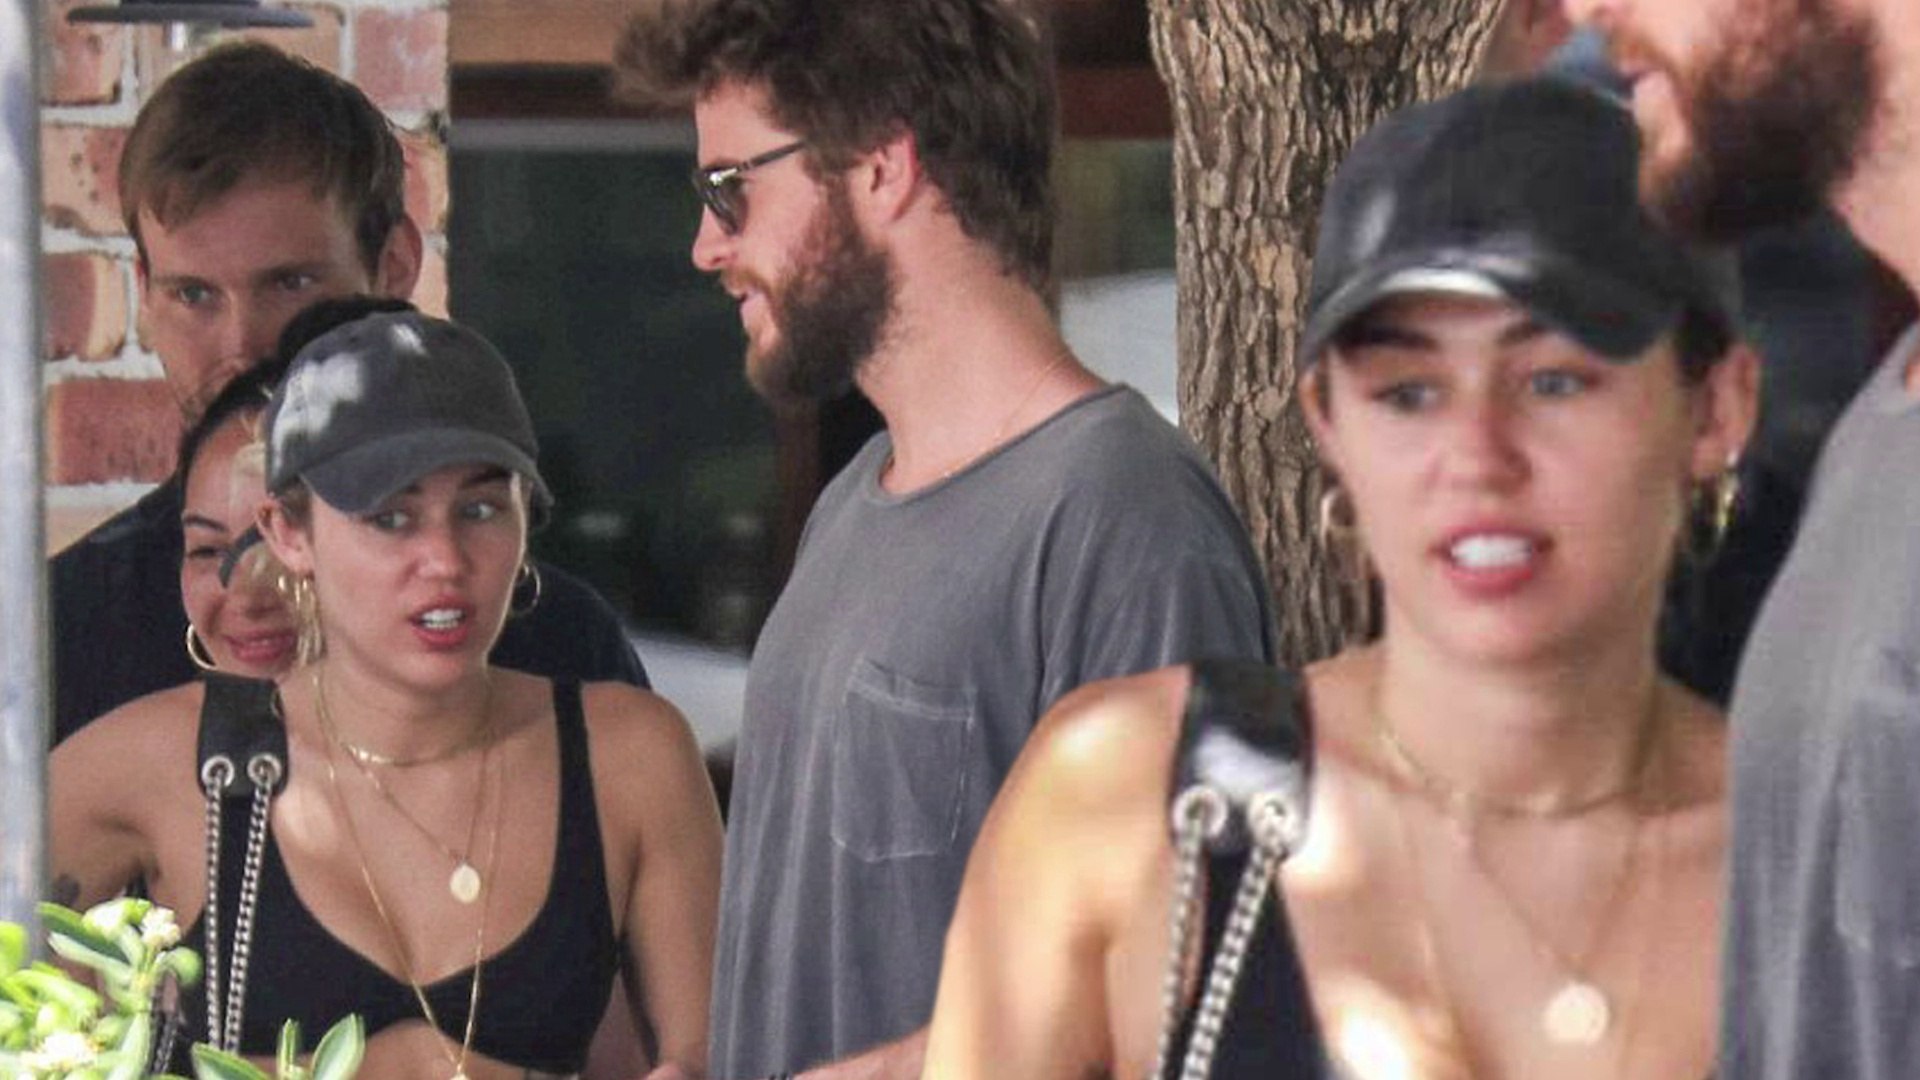 Miley Cyrus flaunts her slender figure in a skimpy bikini top and Daisy Dukes during a relaxed lunch